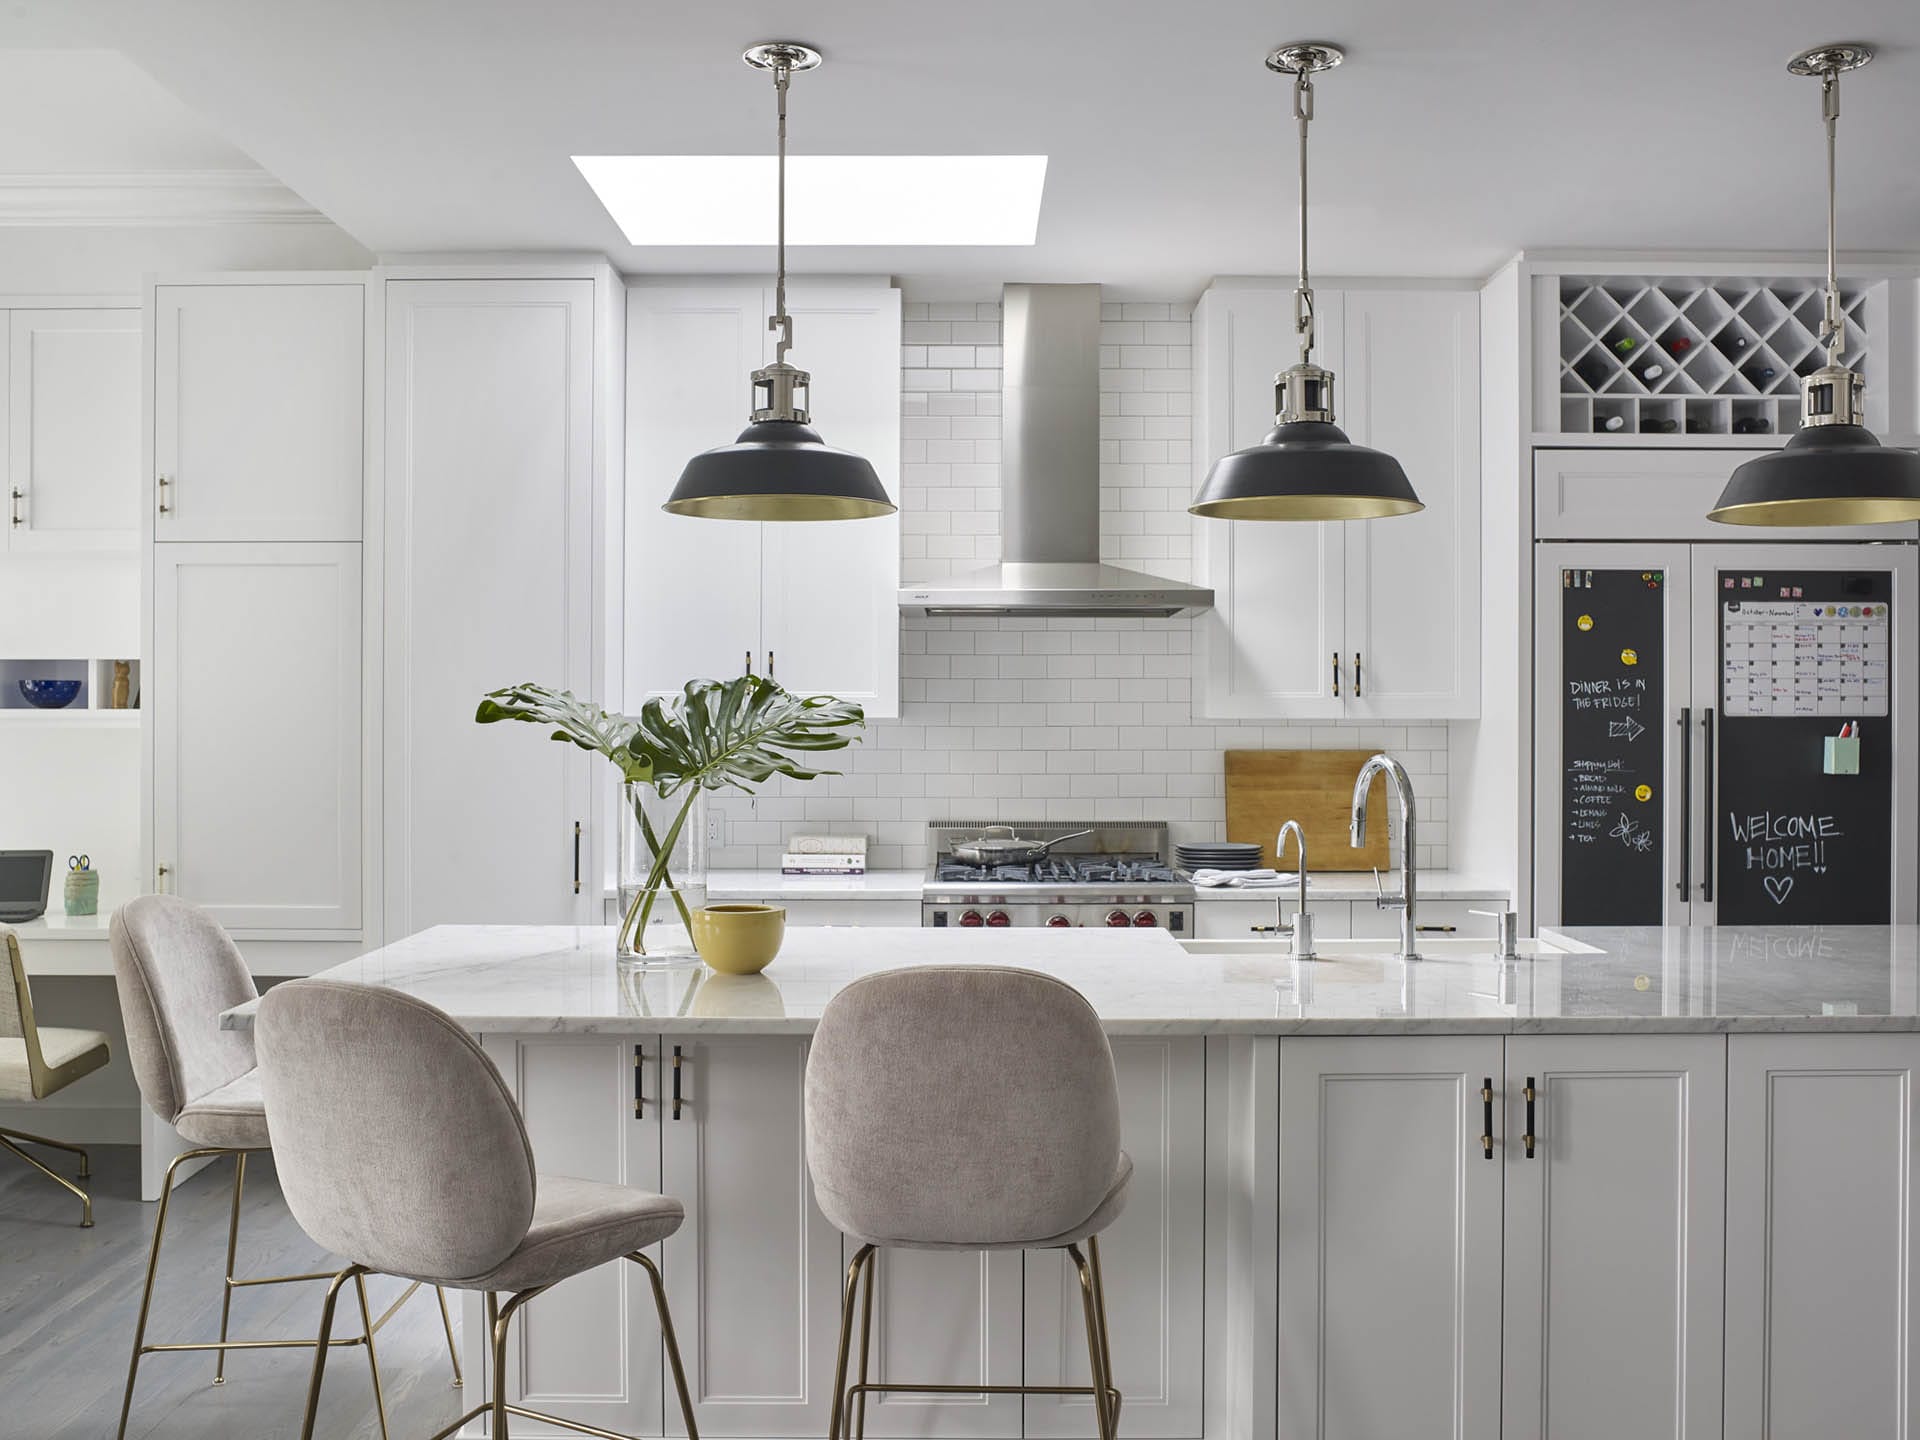 Open, all-white kitchen with black pendant lights hanging above the kitchen island